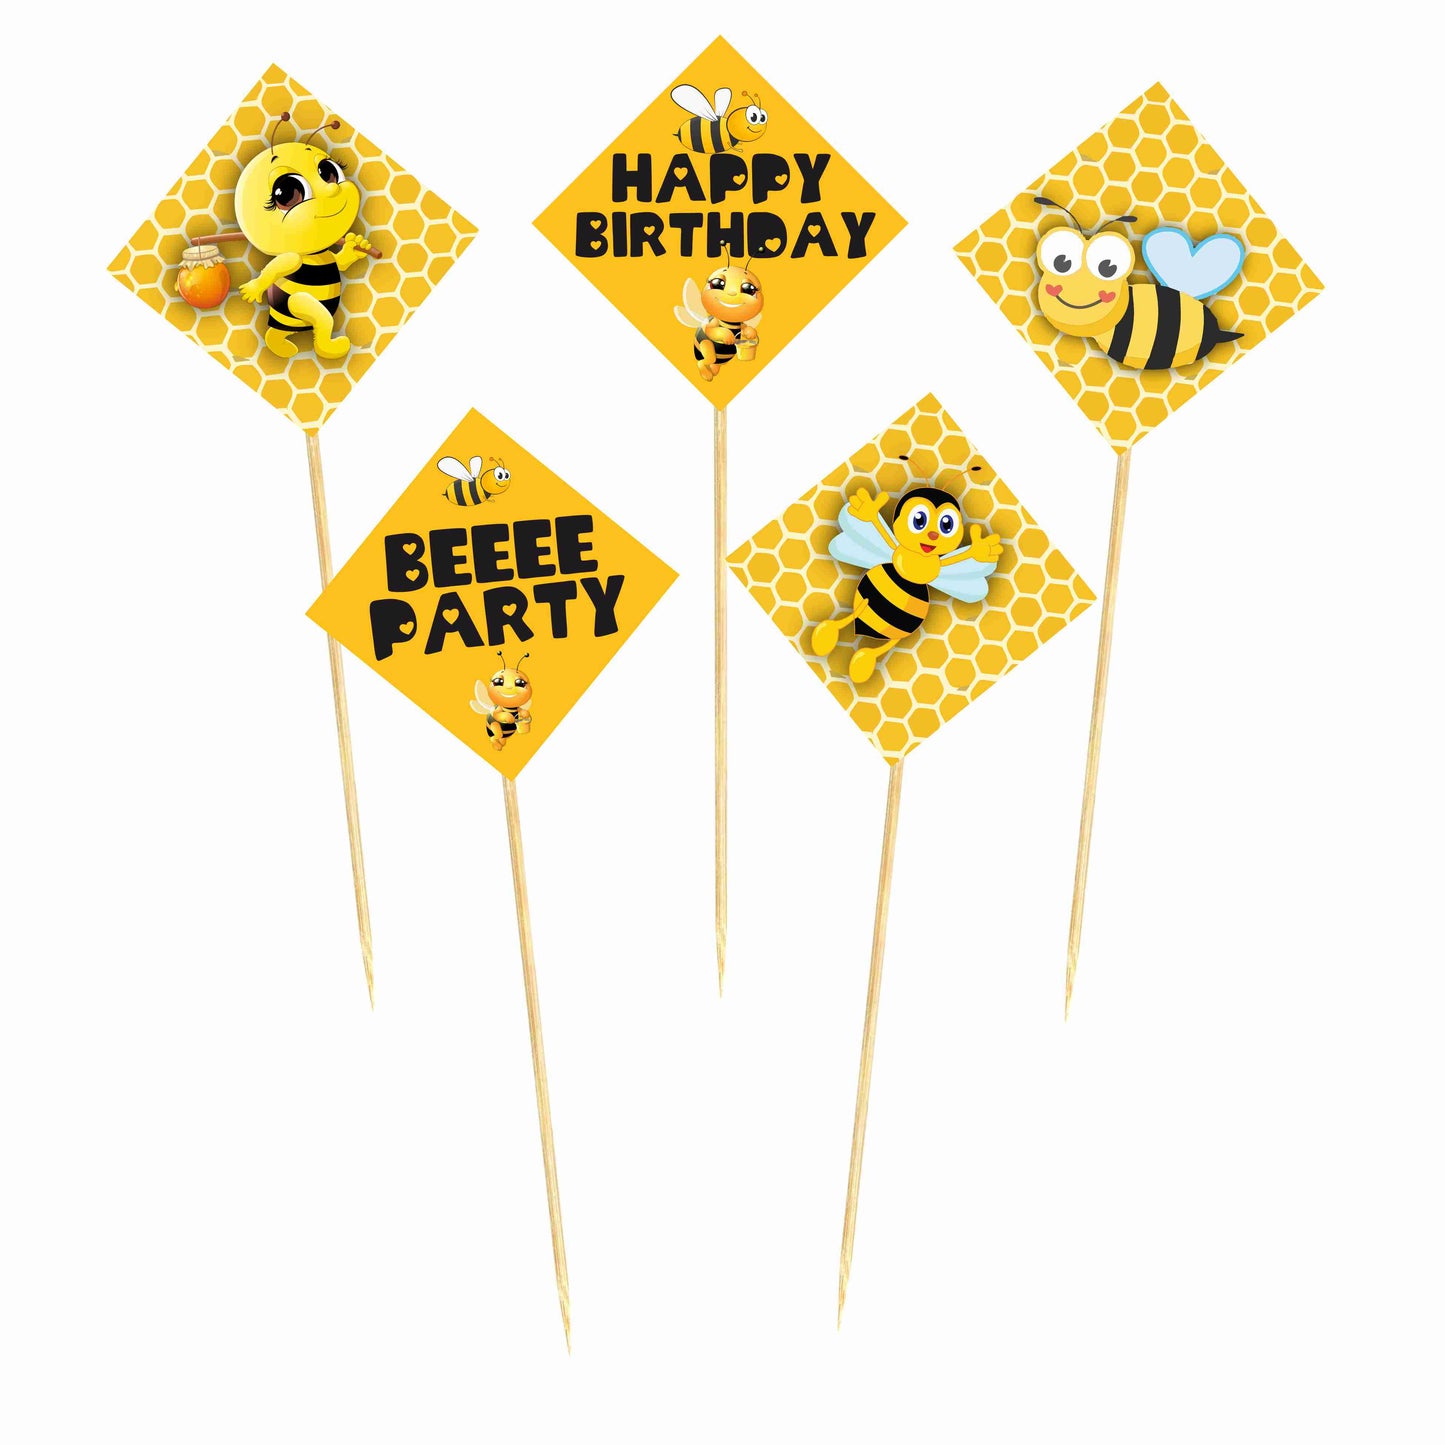 Honey Bee Theme Cake Topper Pack of 10 Nos for Birthday Cake Decoration Theme Party Item For Boys Girls Adults Birthday Theme Decor